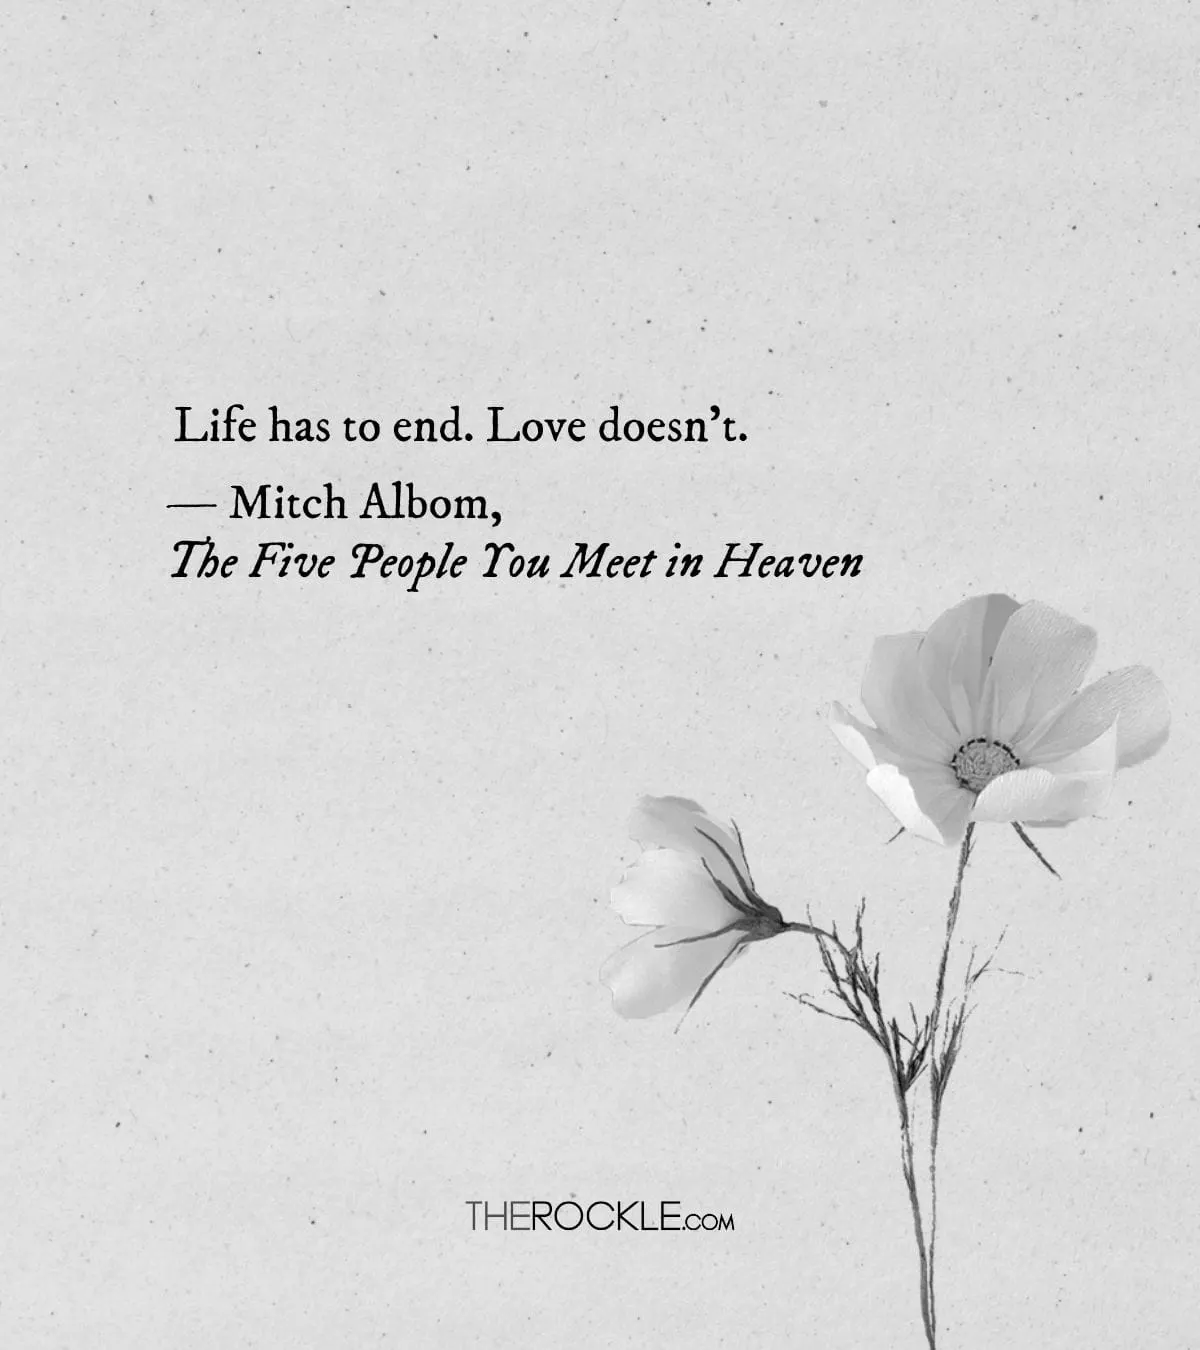 Mitch Albom on the immortality of love